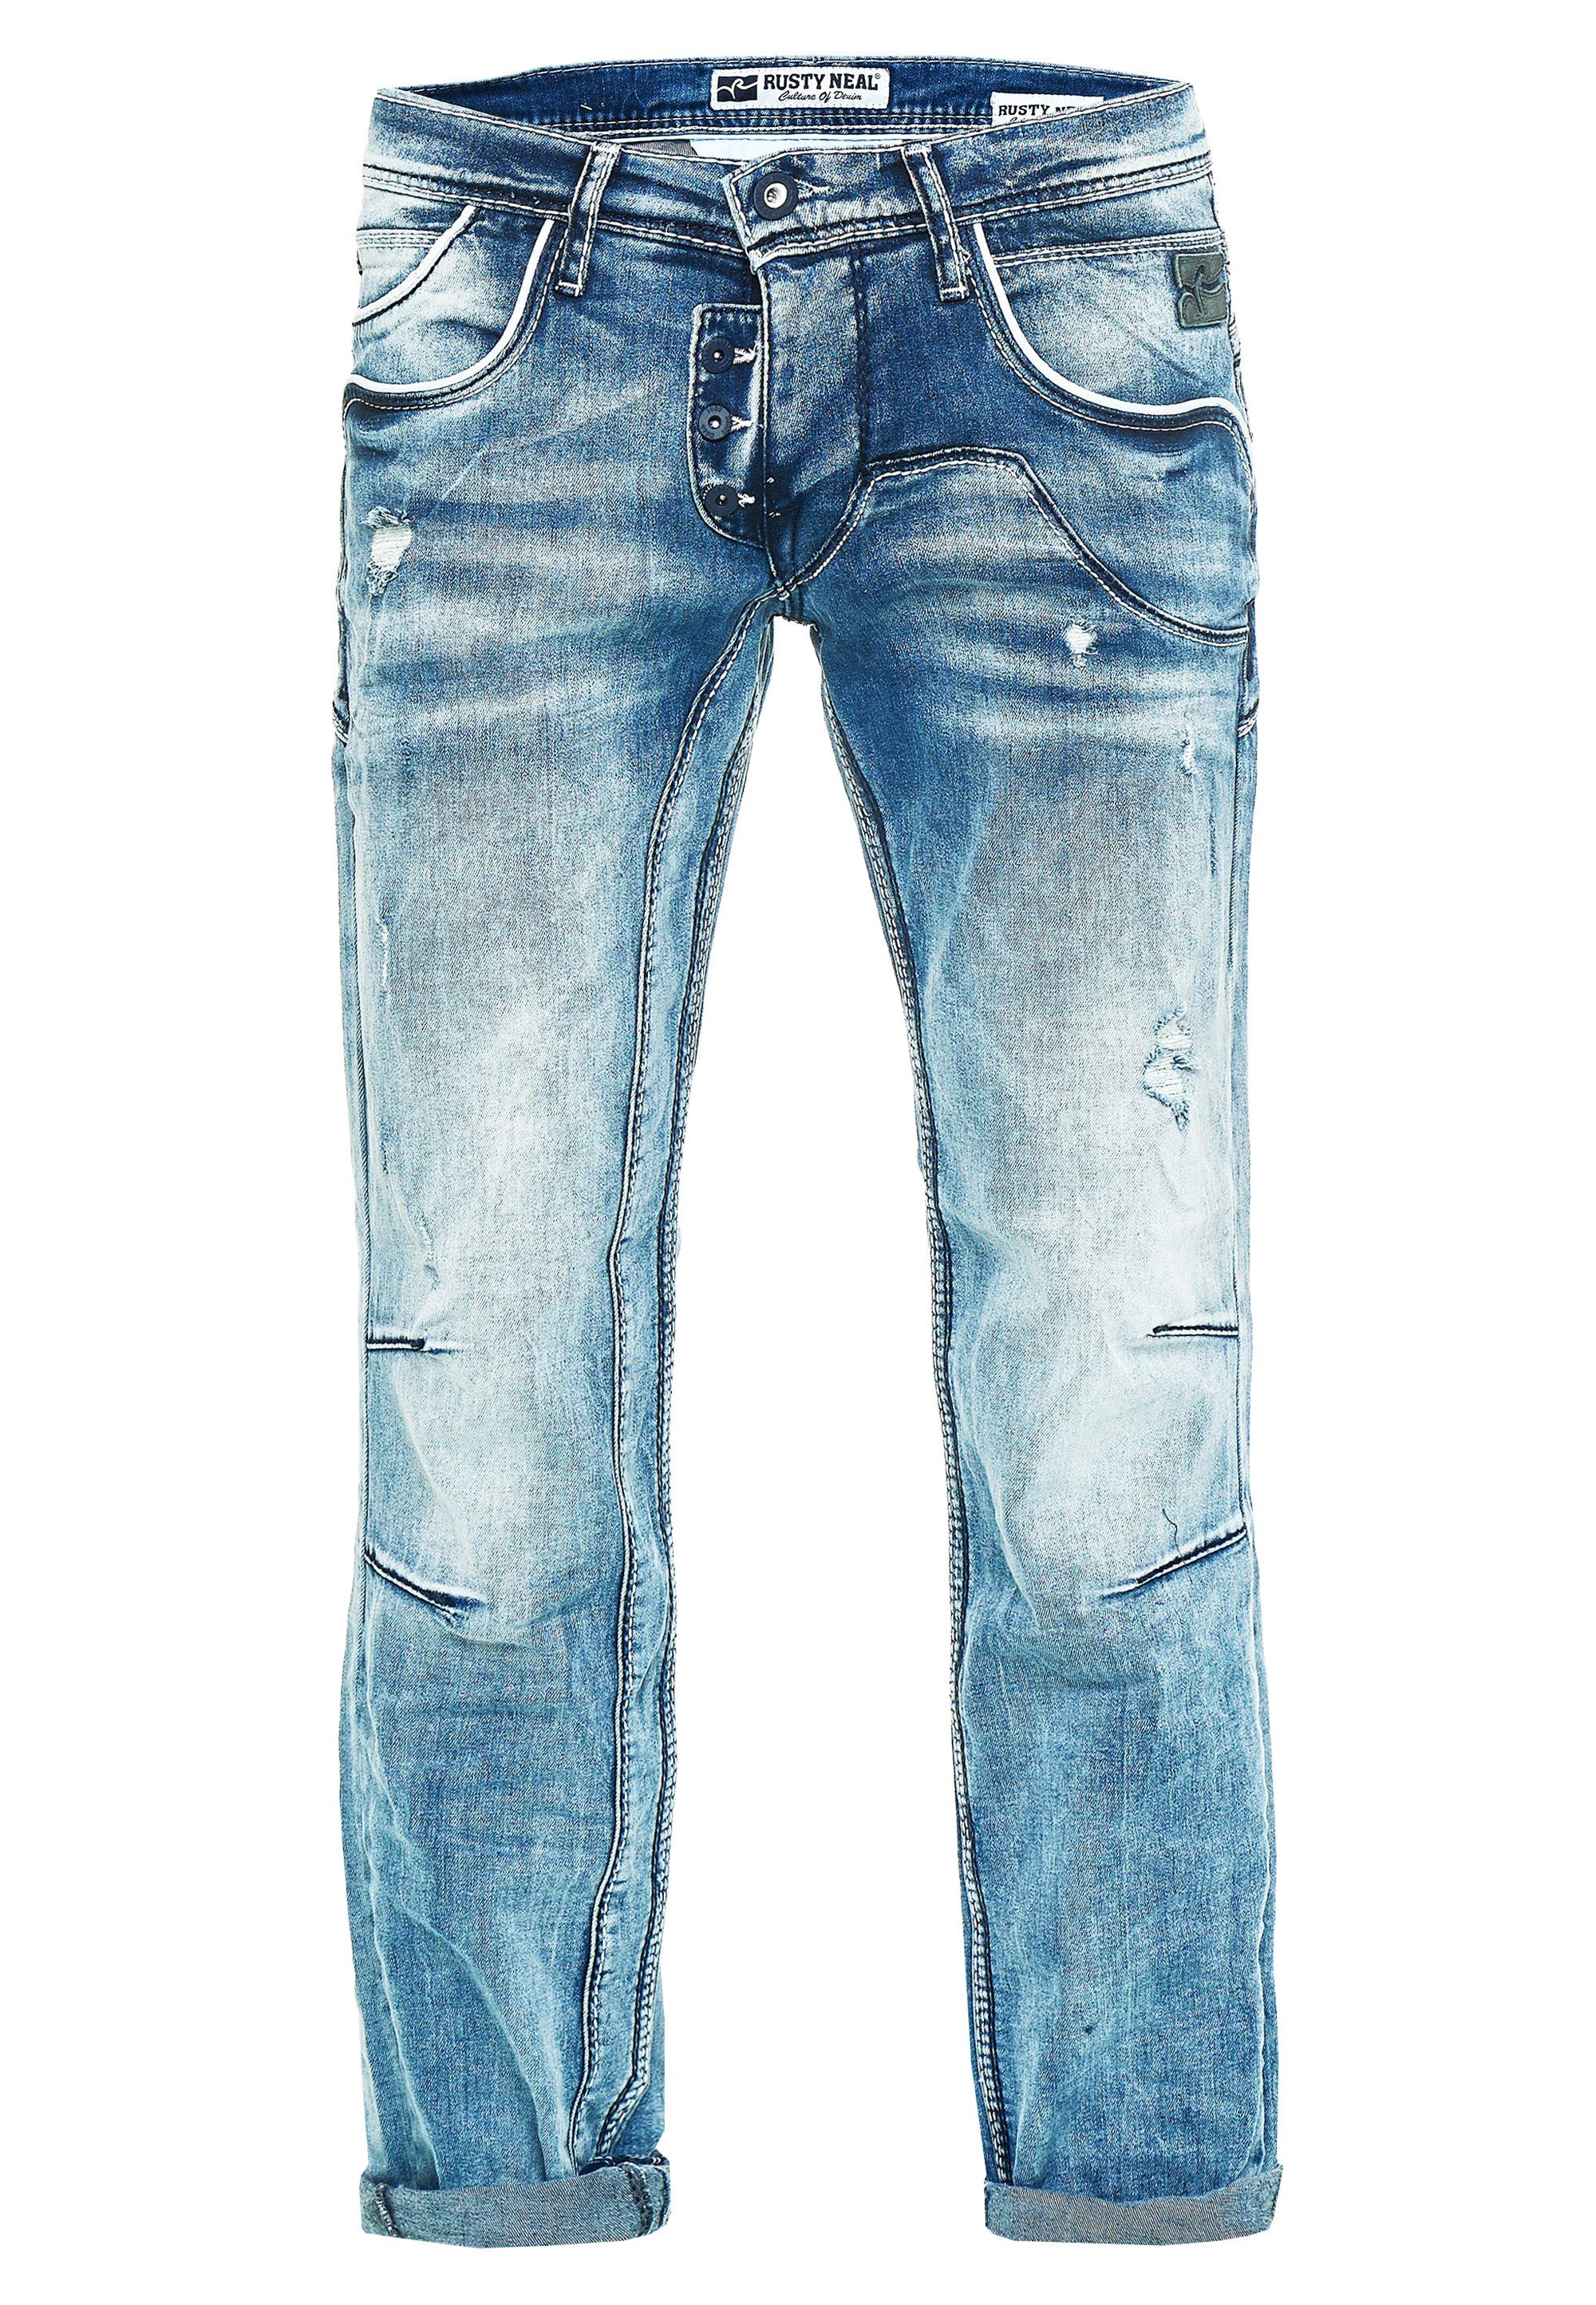 Jeans Rusty Neal Waschung cooler Bequeme mit